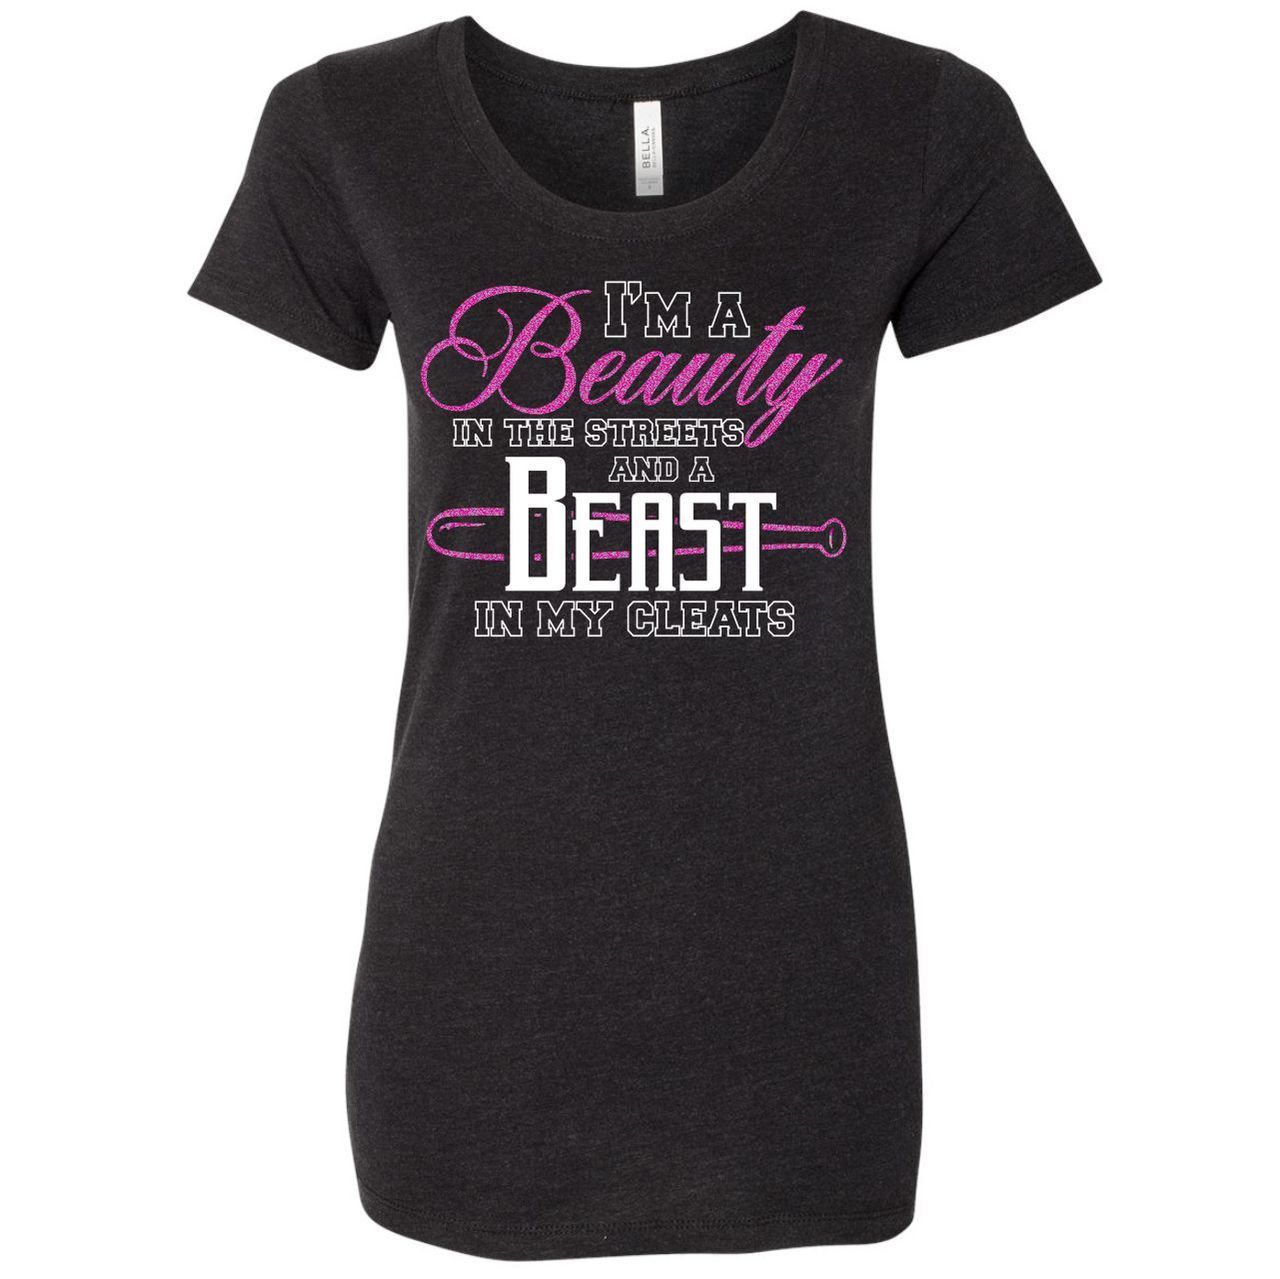 I'm a Beauty in the Streets and a Beast in My Cleats (Softball) - Ladies Black Heather Tee - The Graphic Tee